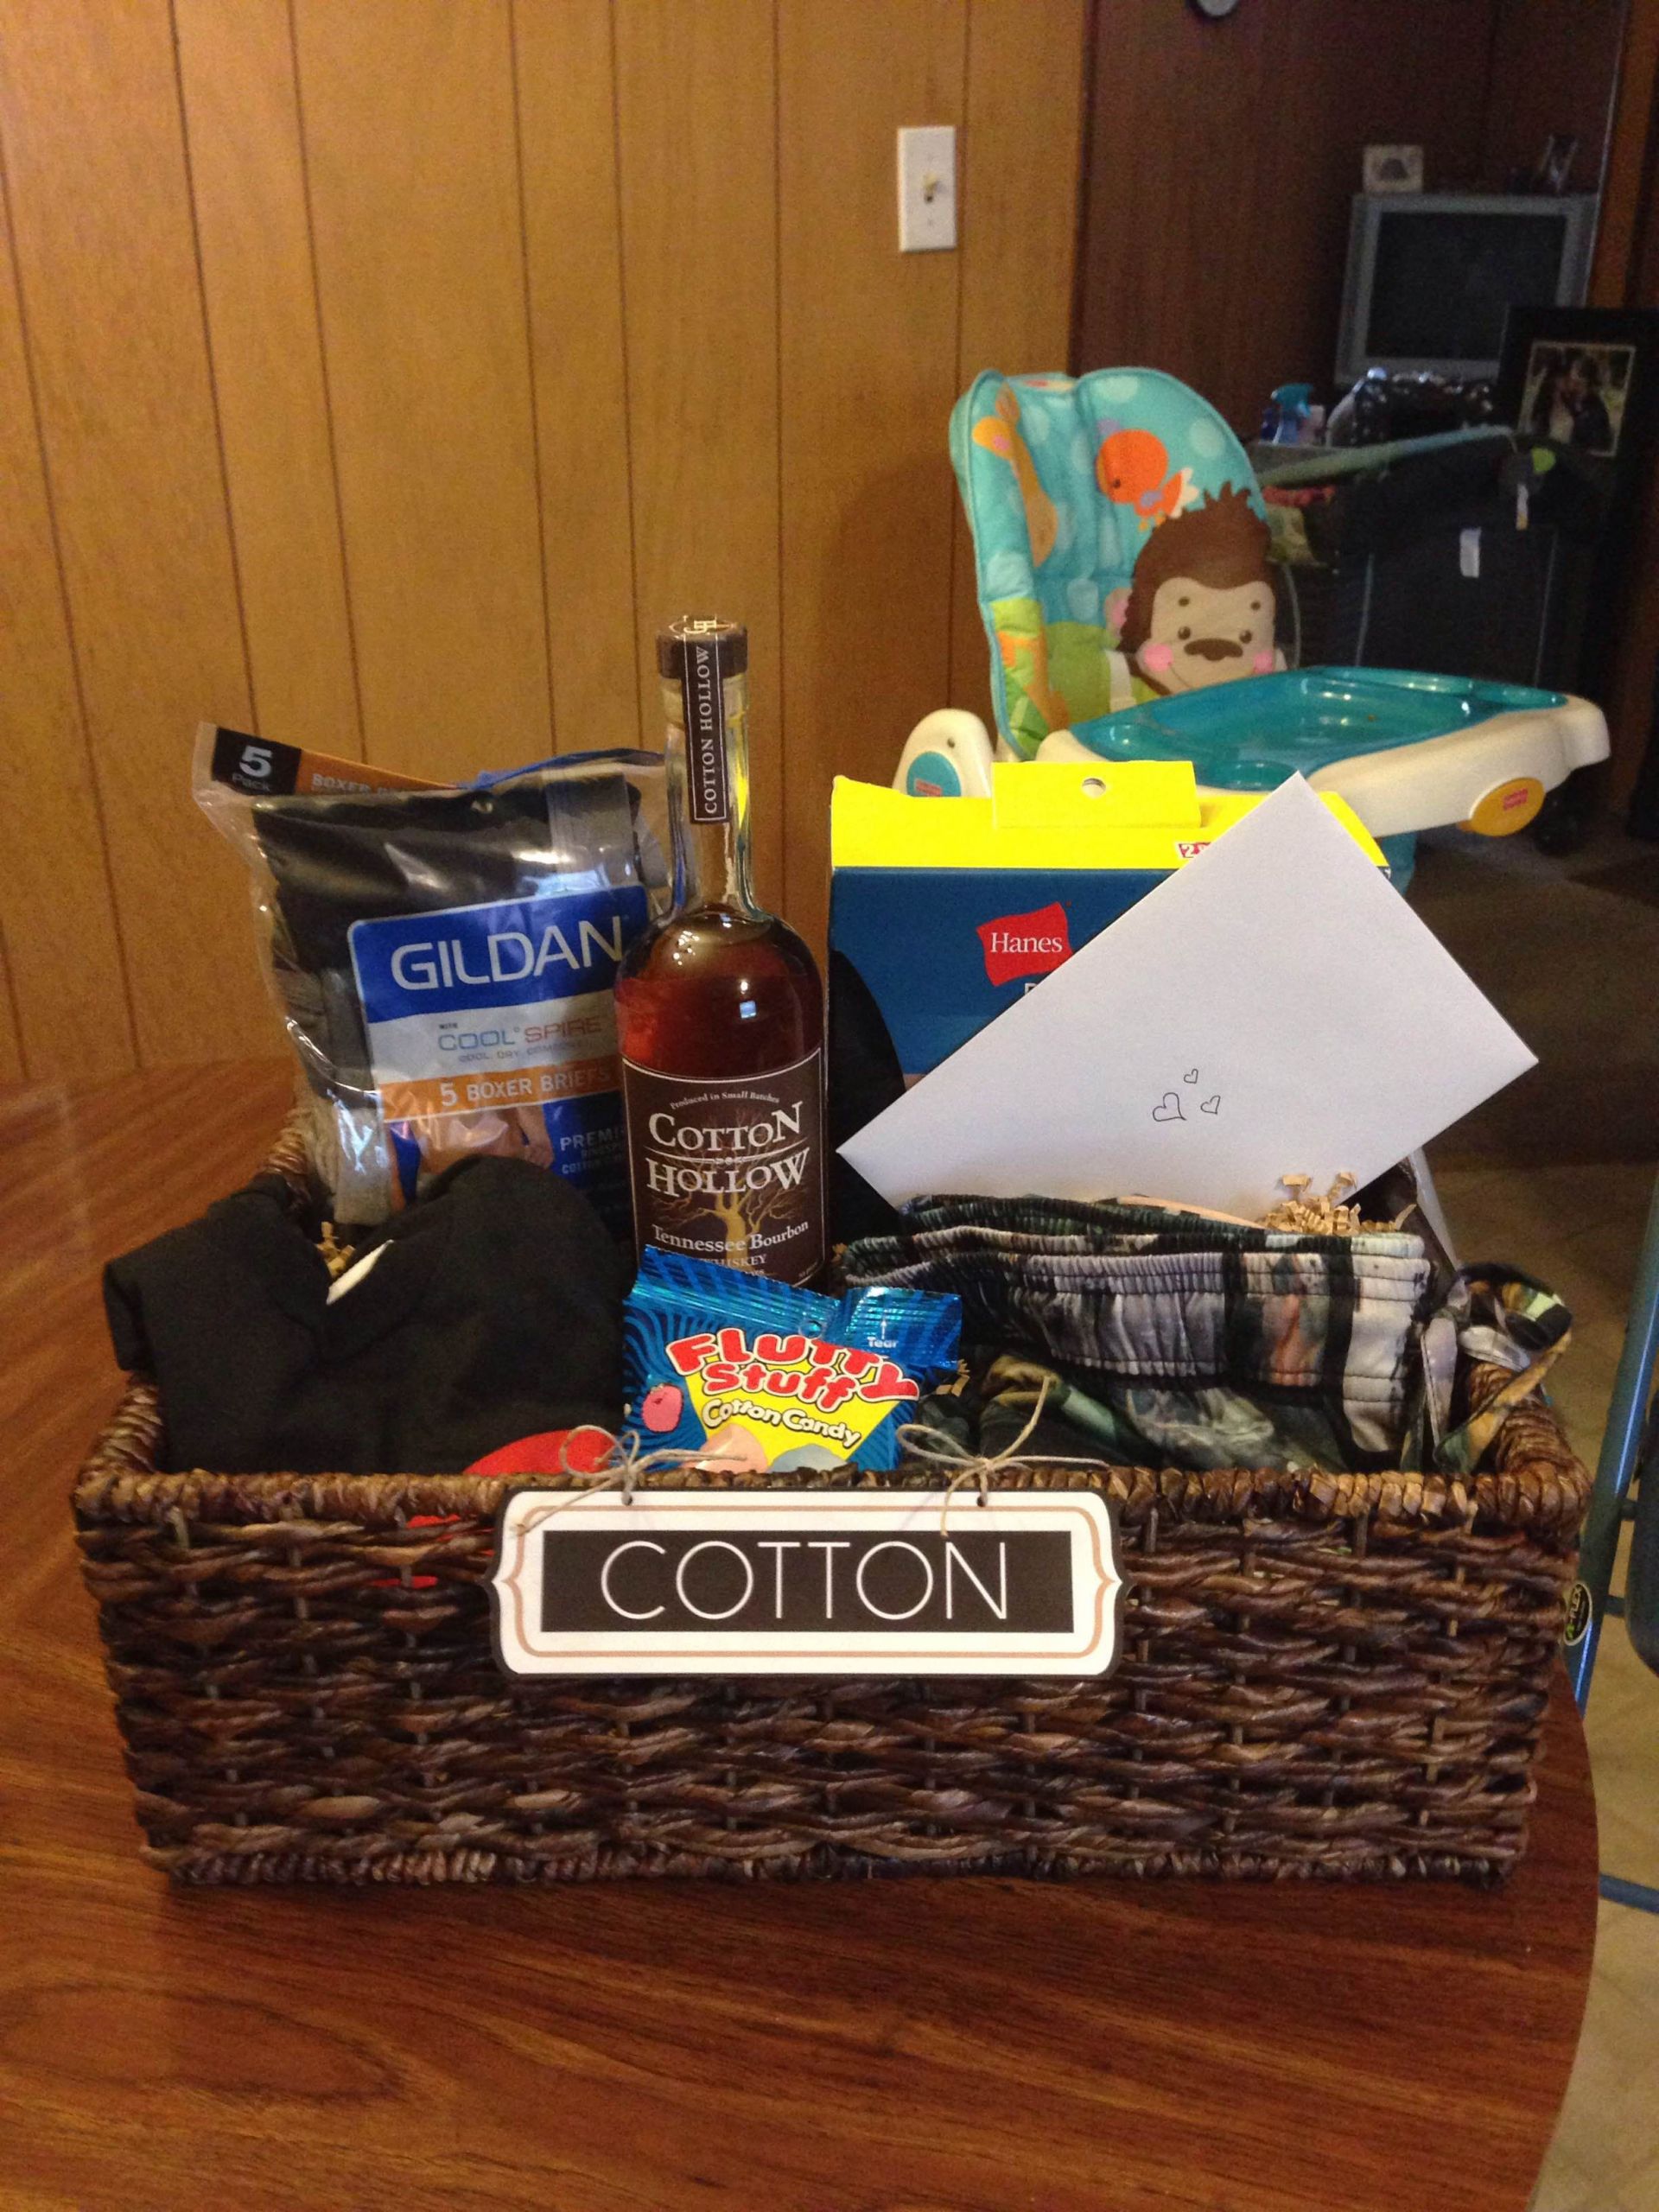 2Nd Wedding Anniversary Gift Ideas For Him
 "Cotton" t basket I put to her for my husband for our